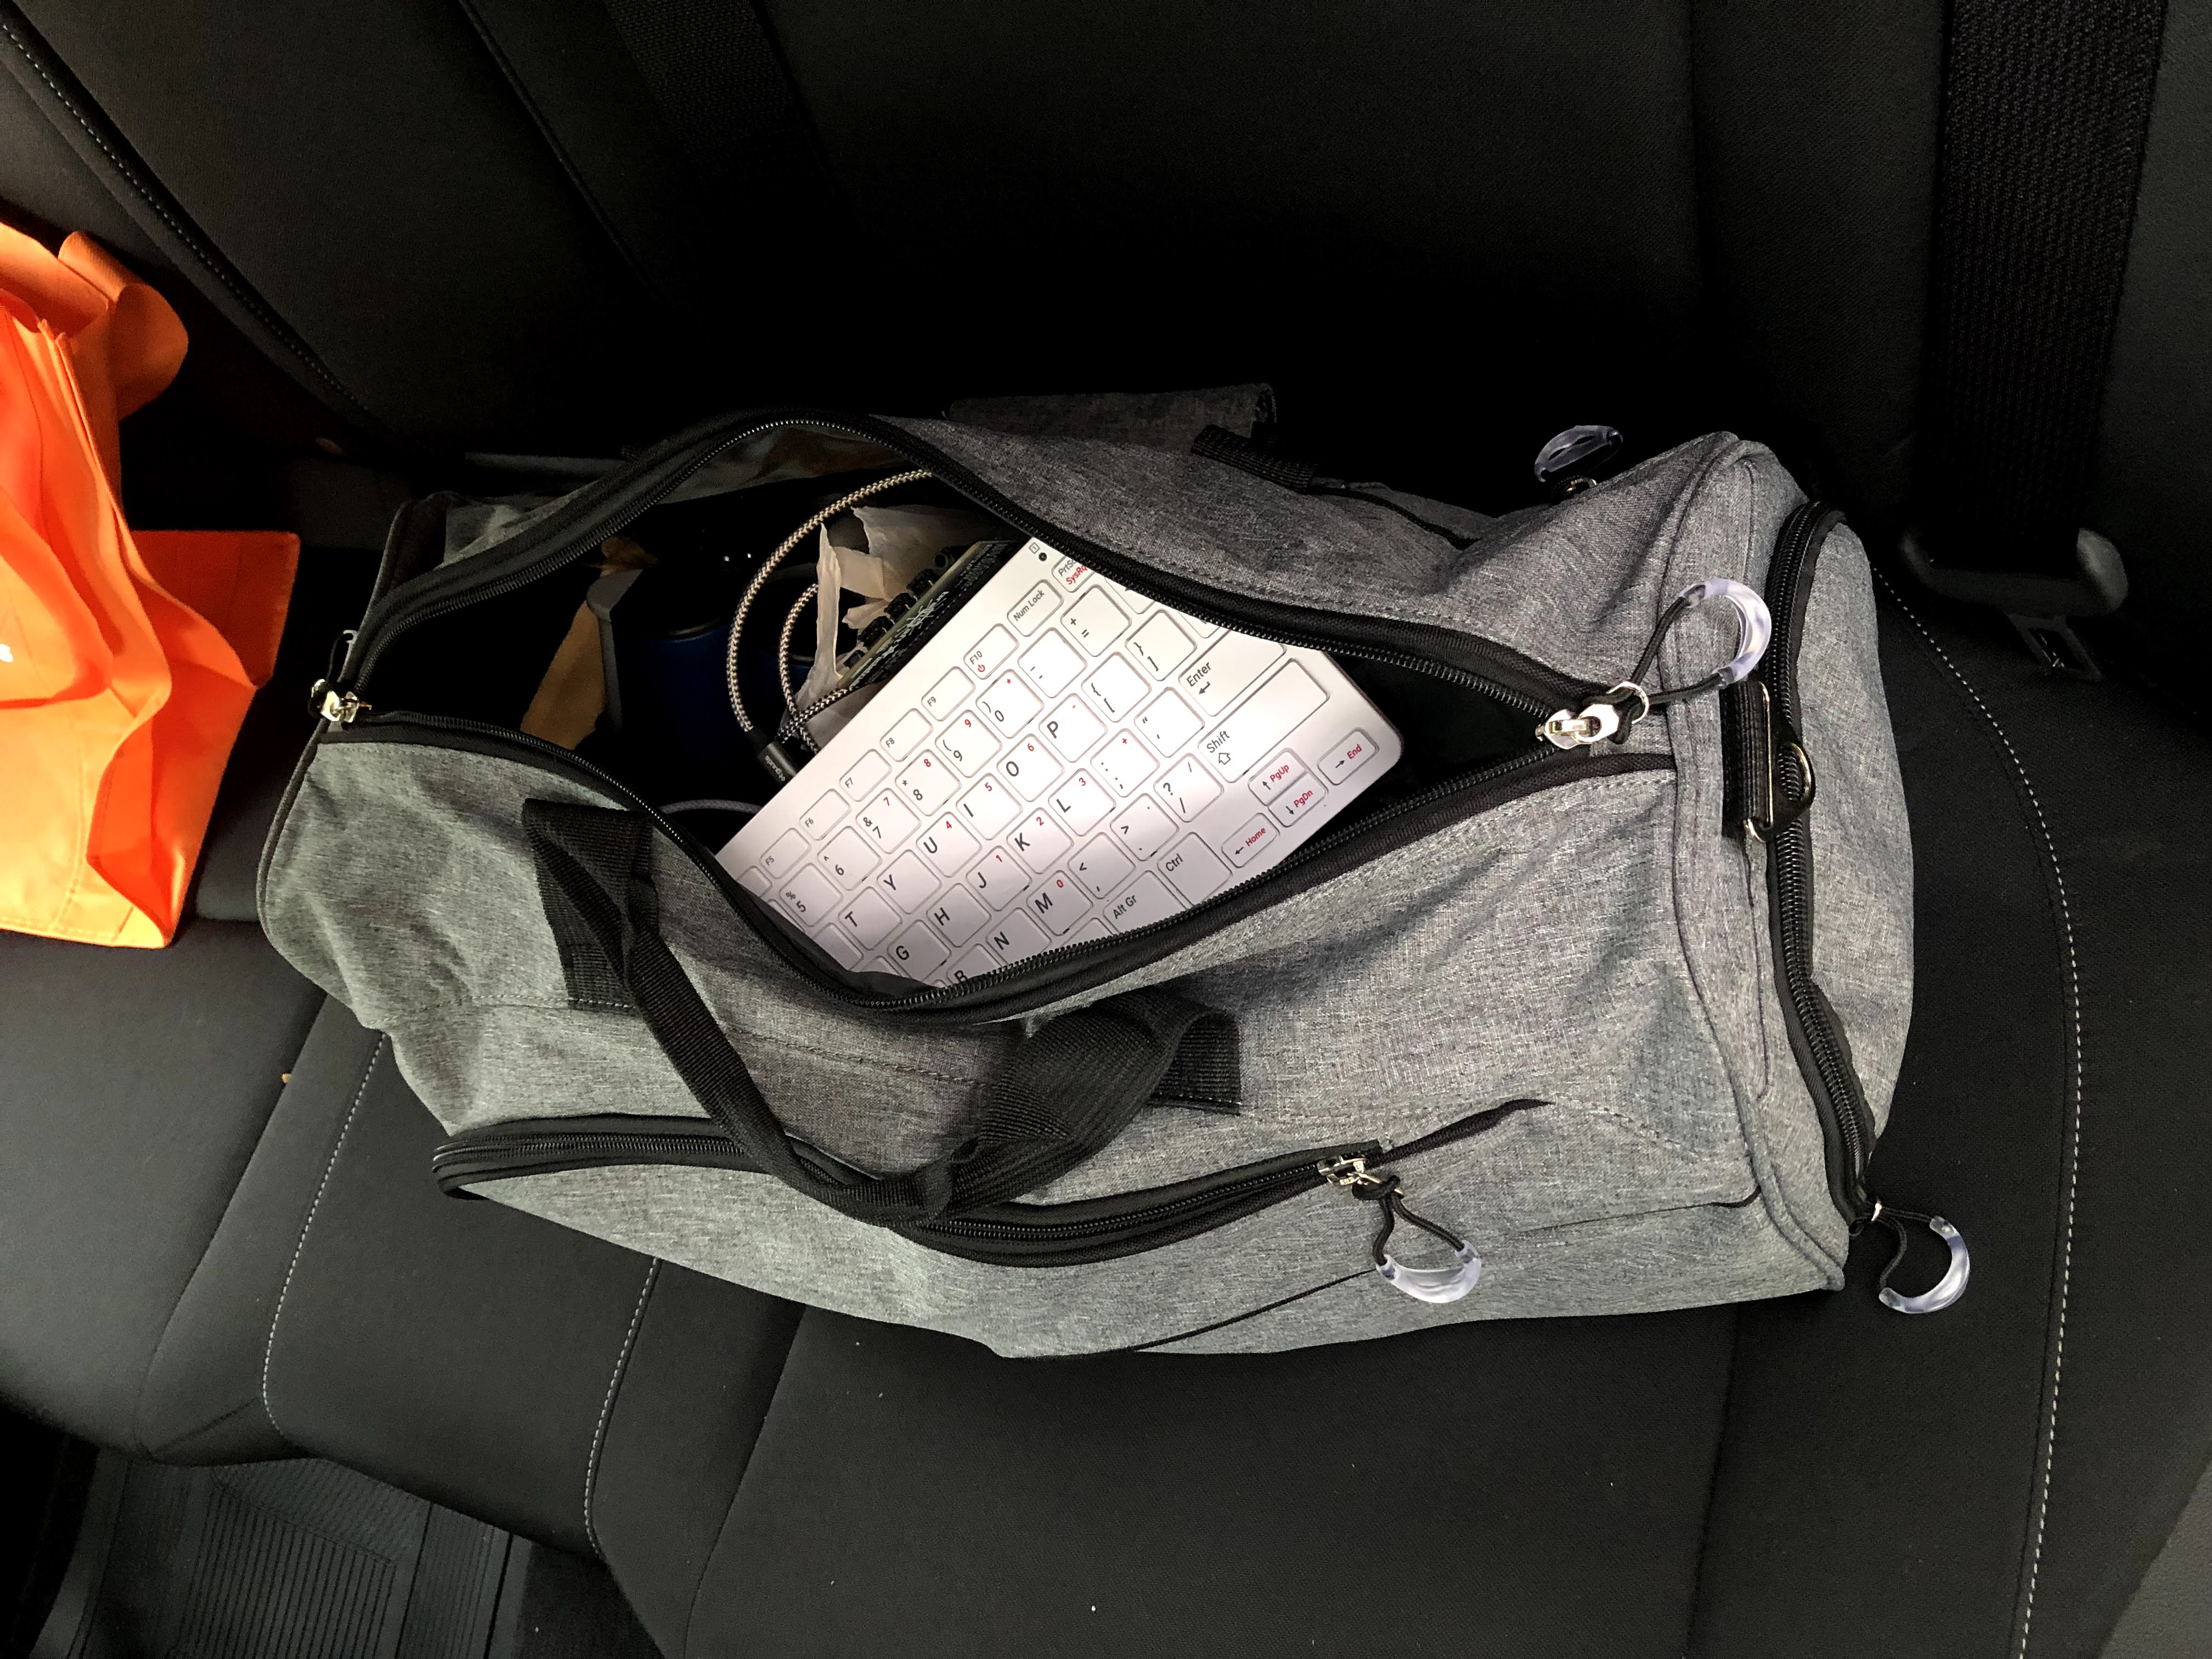 Photo of Go Note Go in a gym bag.